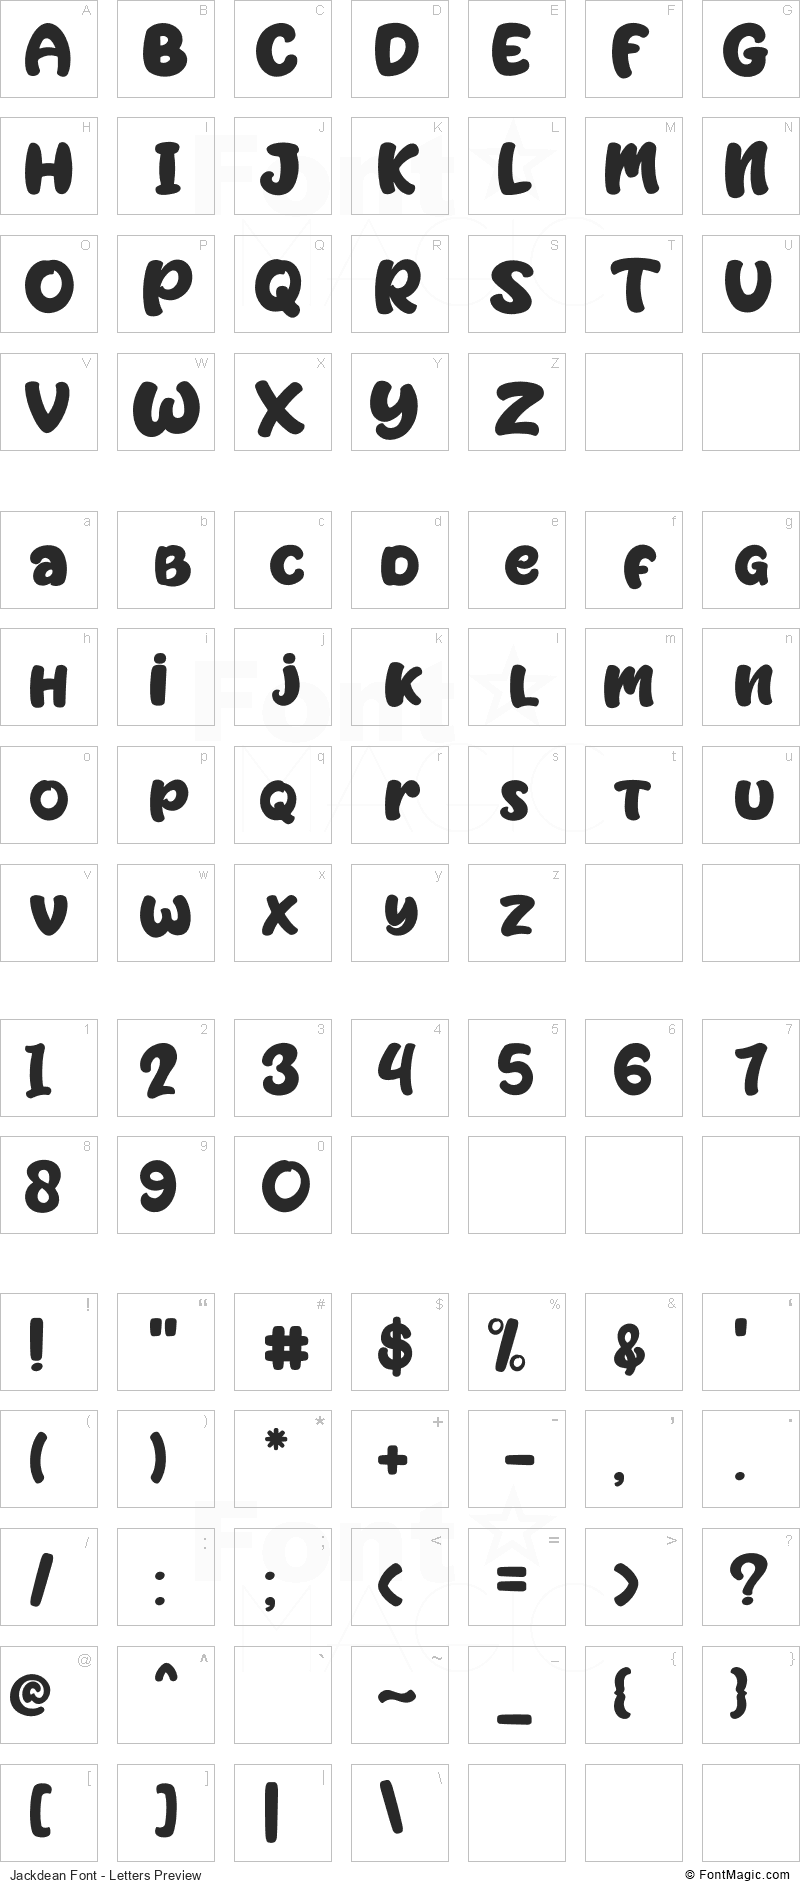 Jackdean Font - All Latters Preview Chart